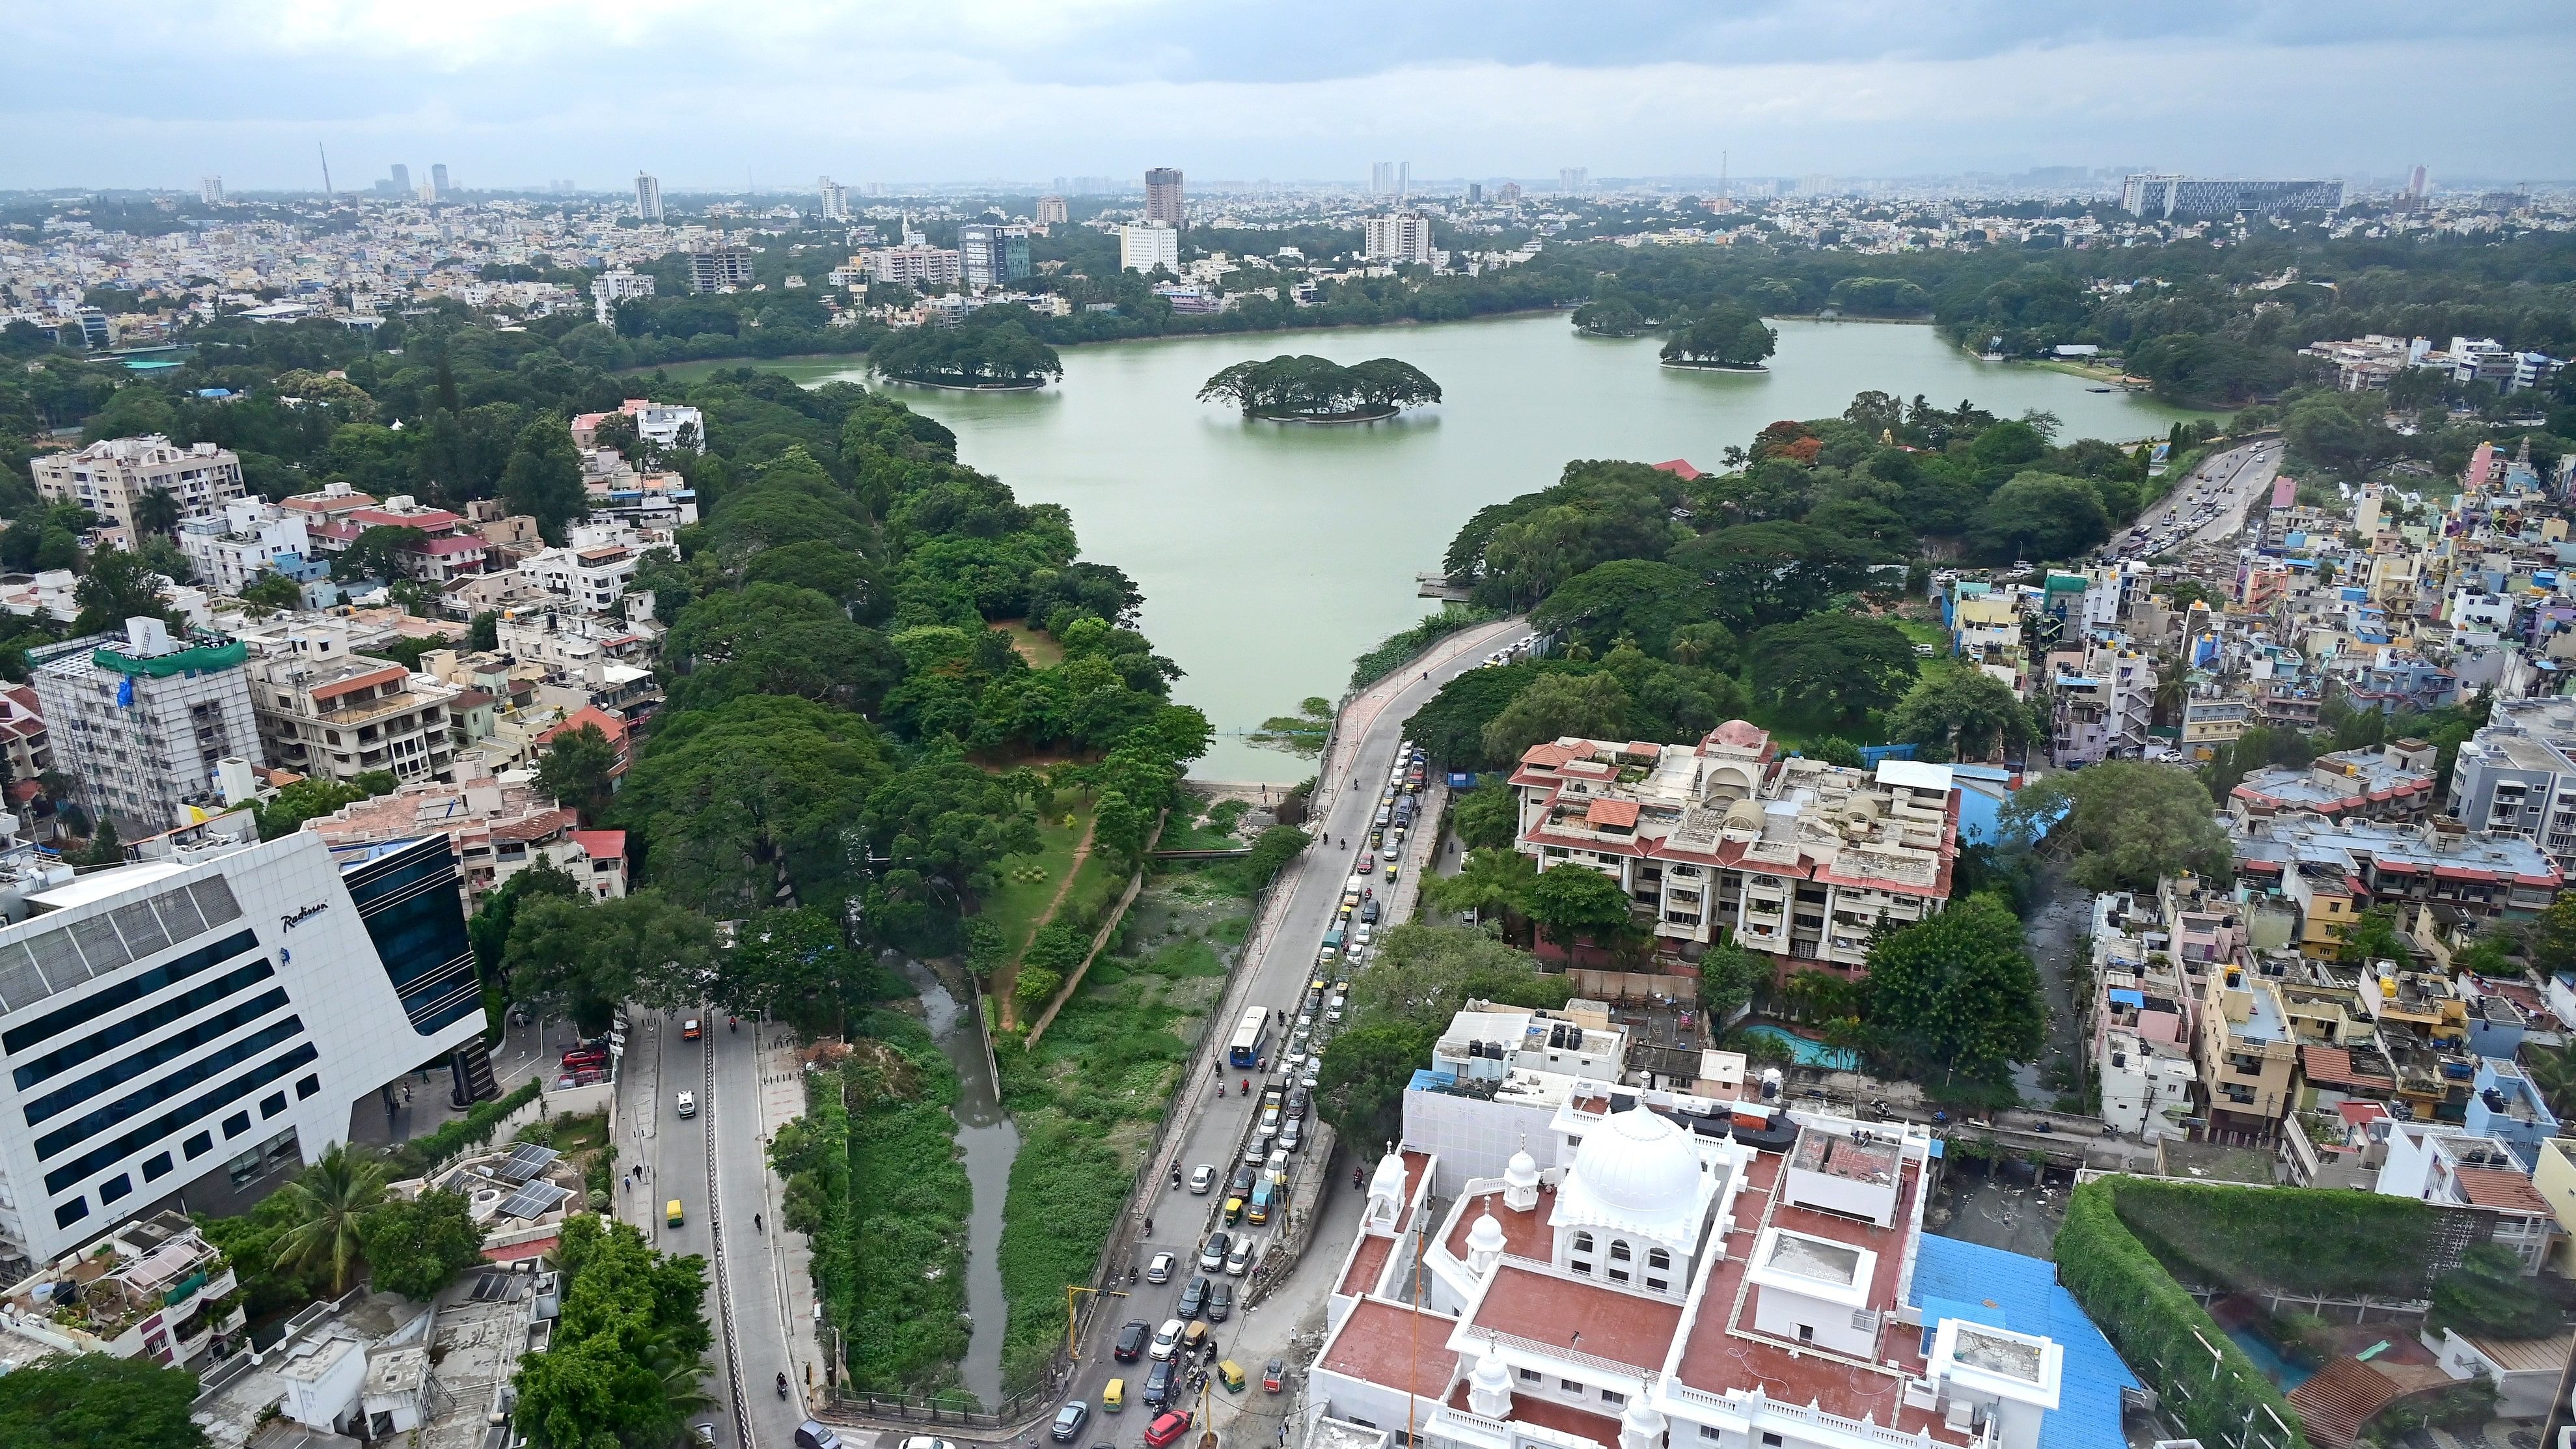 <div class="paragraphs"><p>Despite spending crores, the BBMP has provided Rs 46 lakh for fencing and another Rs 45 lakh for the upkeep of Ulsoor lake, even as many lakes are dying due to lack of funds. </p></div>